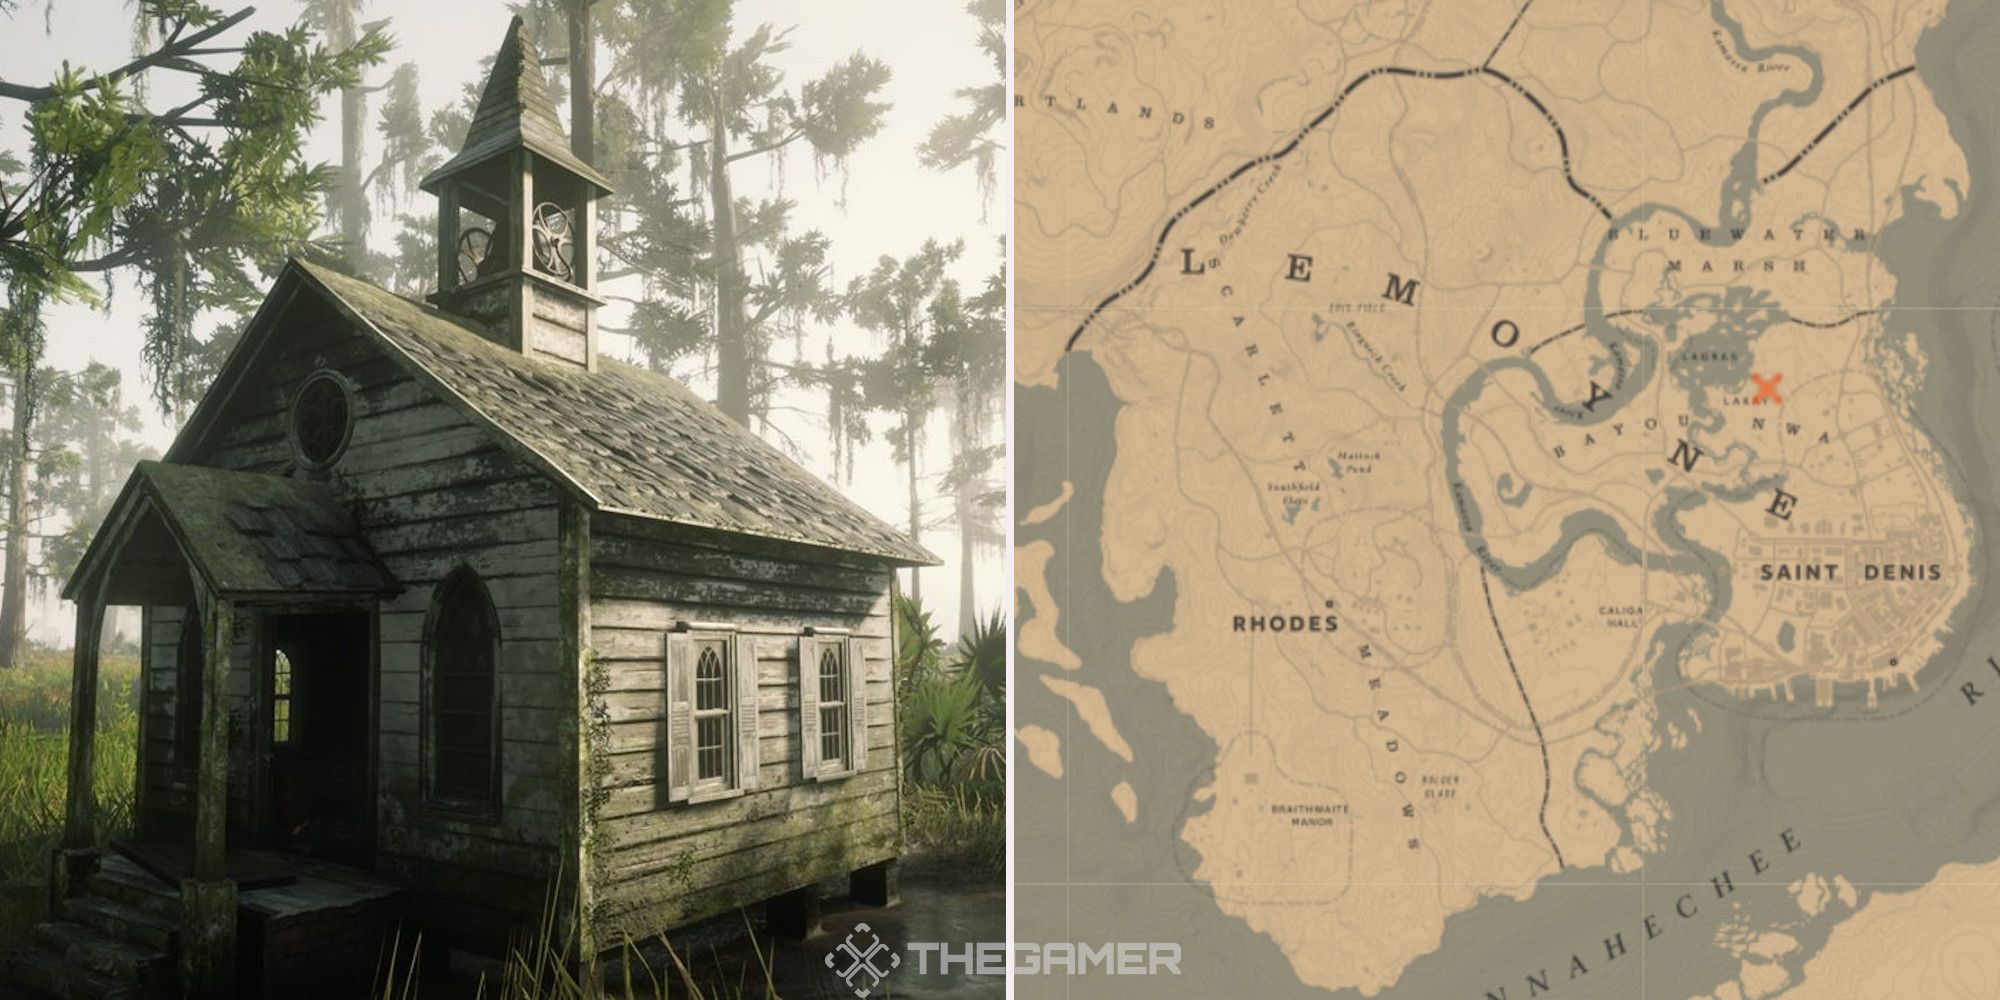 The tiny church in Red Dead Redemption 2, next to an image of where it can be found marked on the map.